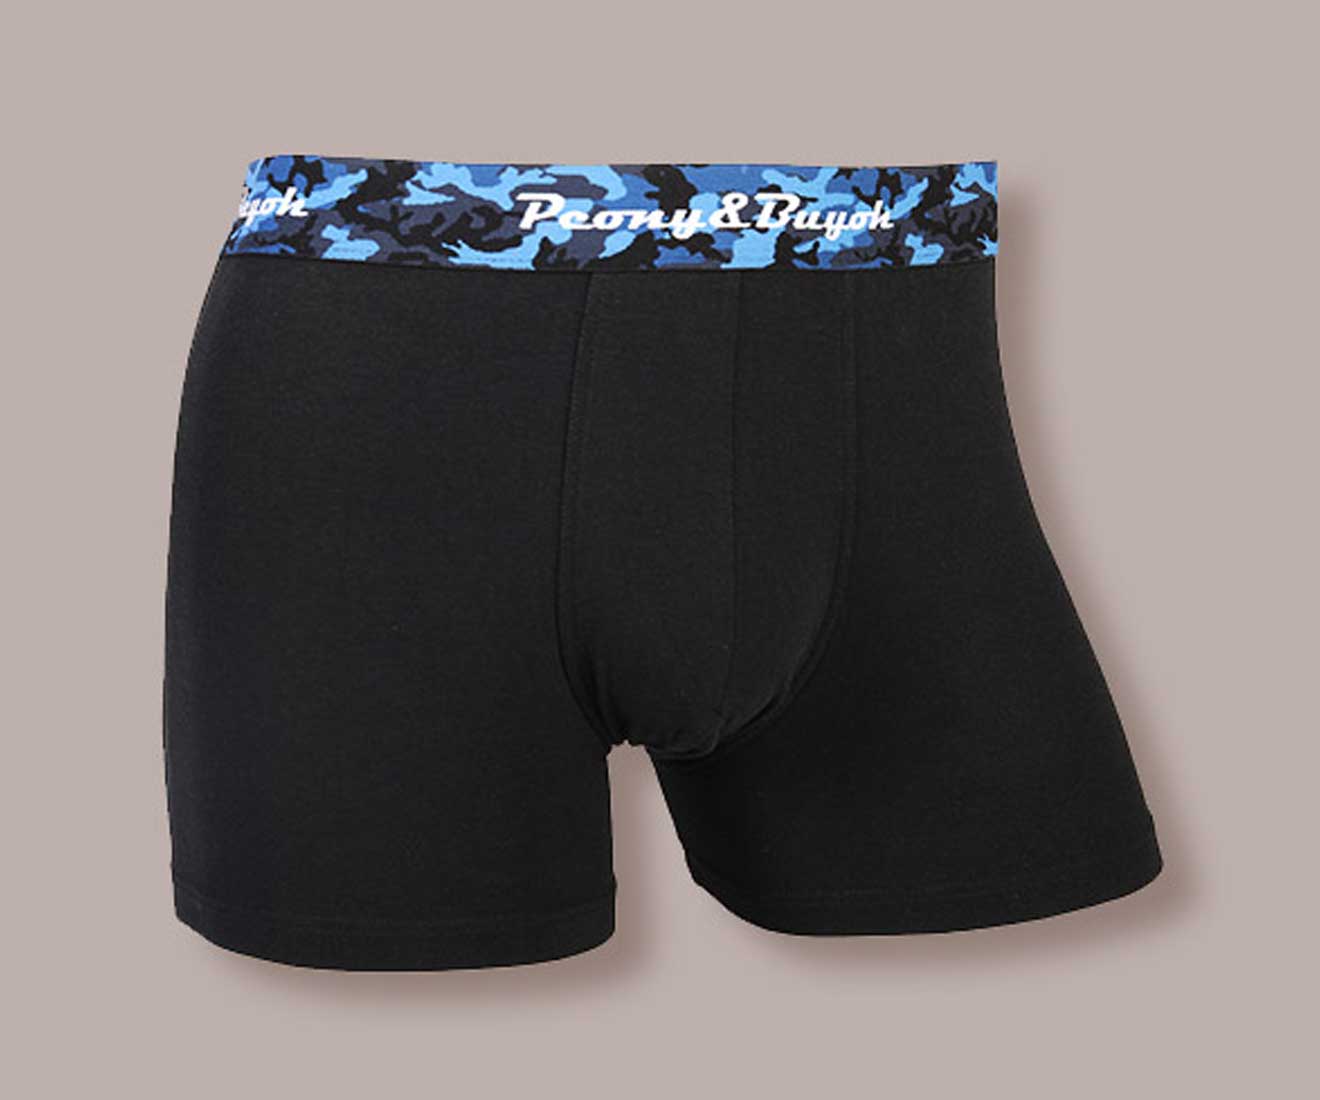 Men's Trunks With Seamless Shaped Pouch